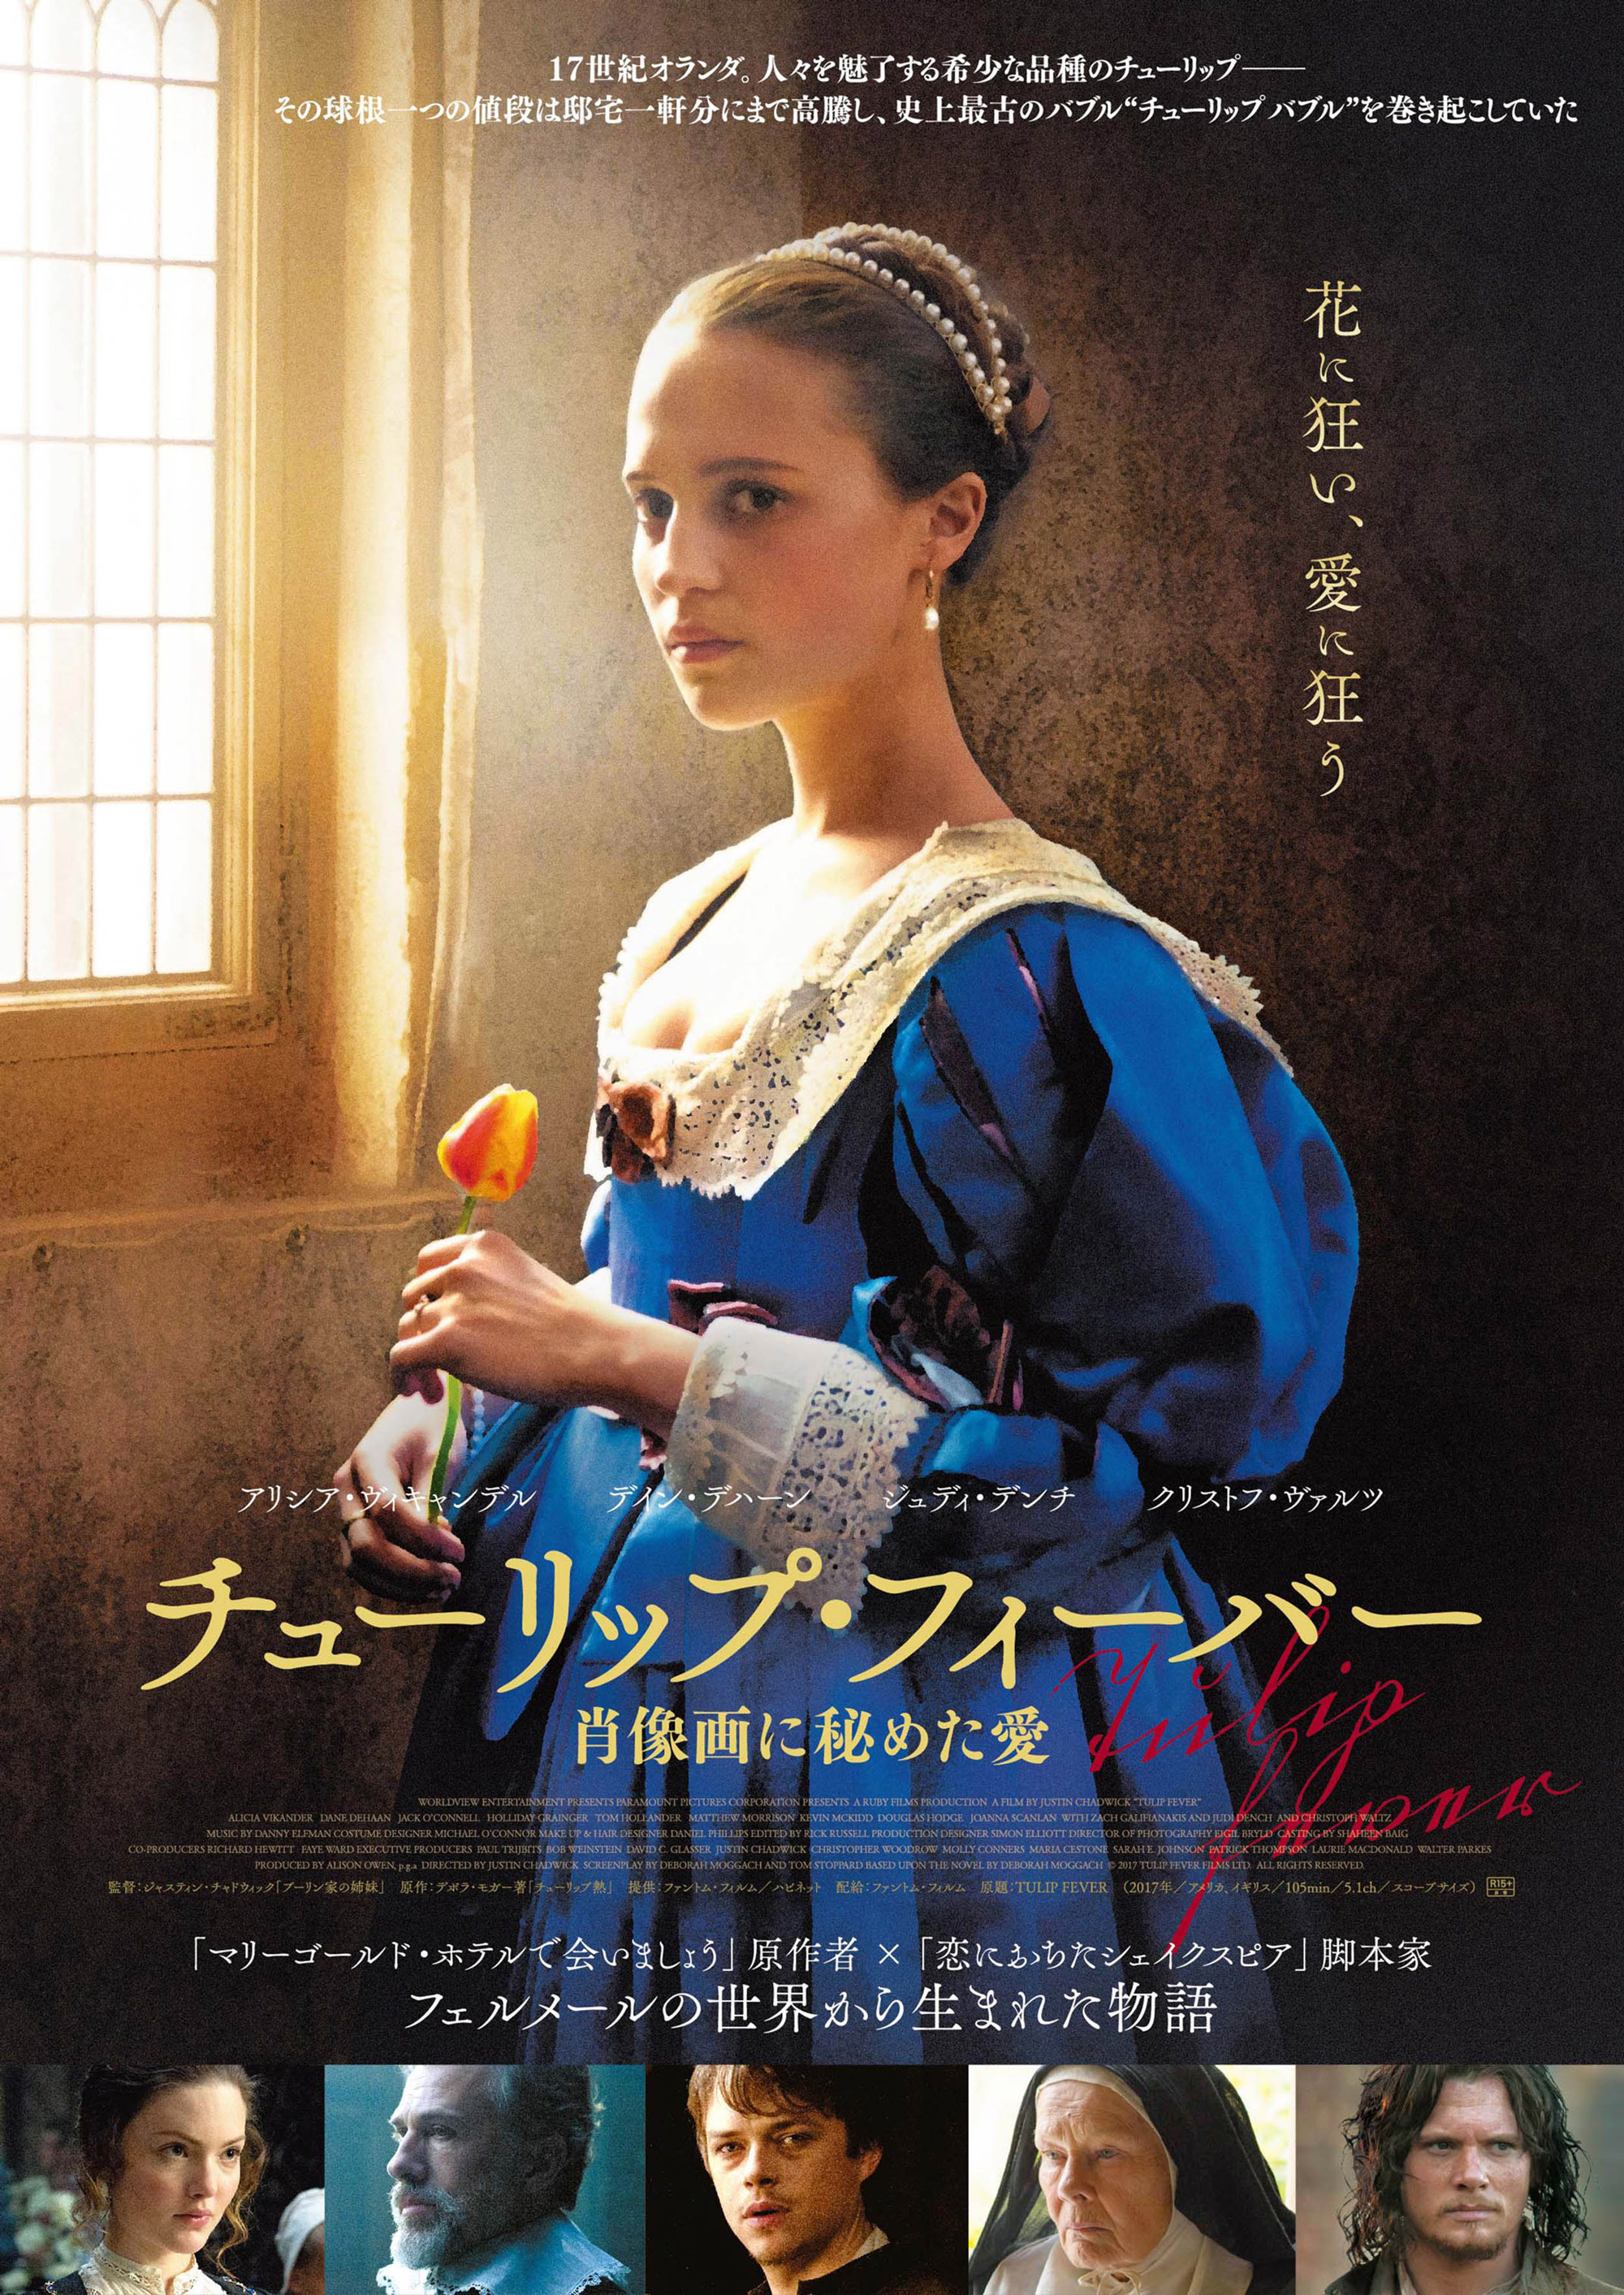 (C) 2017 TULIP FEVER FILMS LTD.  ALL RIGHTS RESERVED.